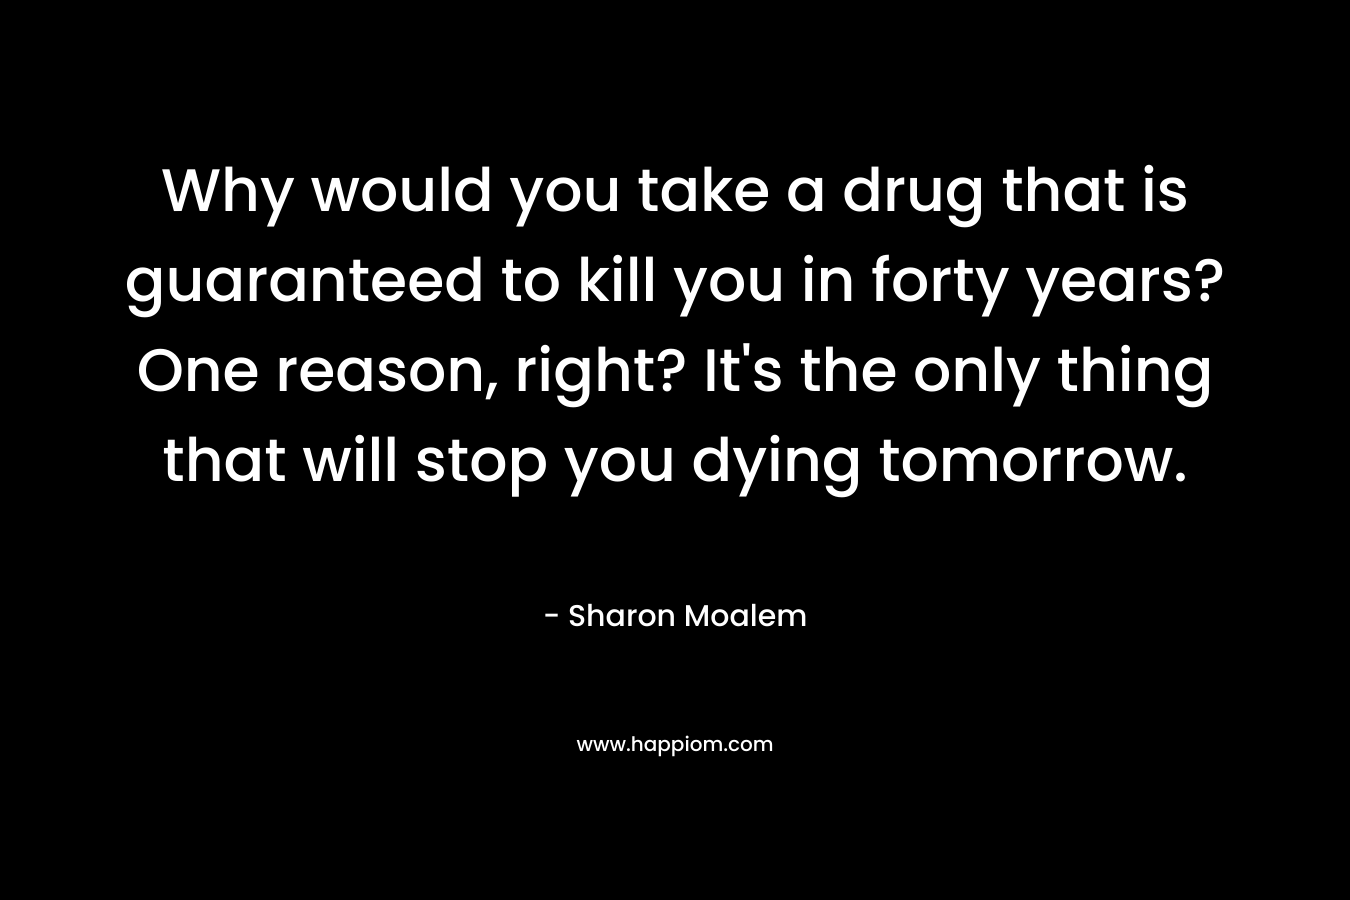 Why would you take a drug that is guaranteed to kill you in forty years? One reason, right? It’s the only thing that will stop you dying tomorrow. – Sharon Moalem